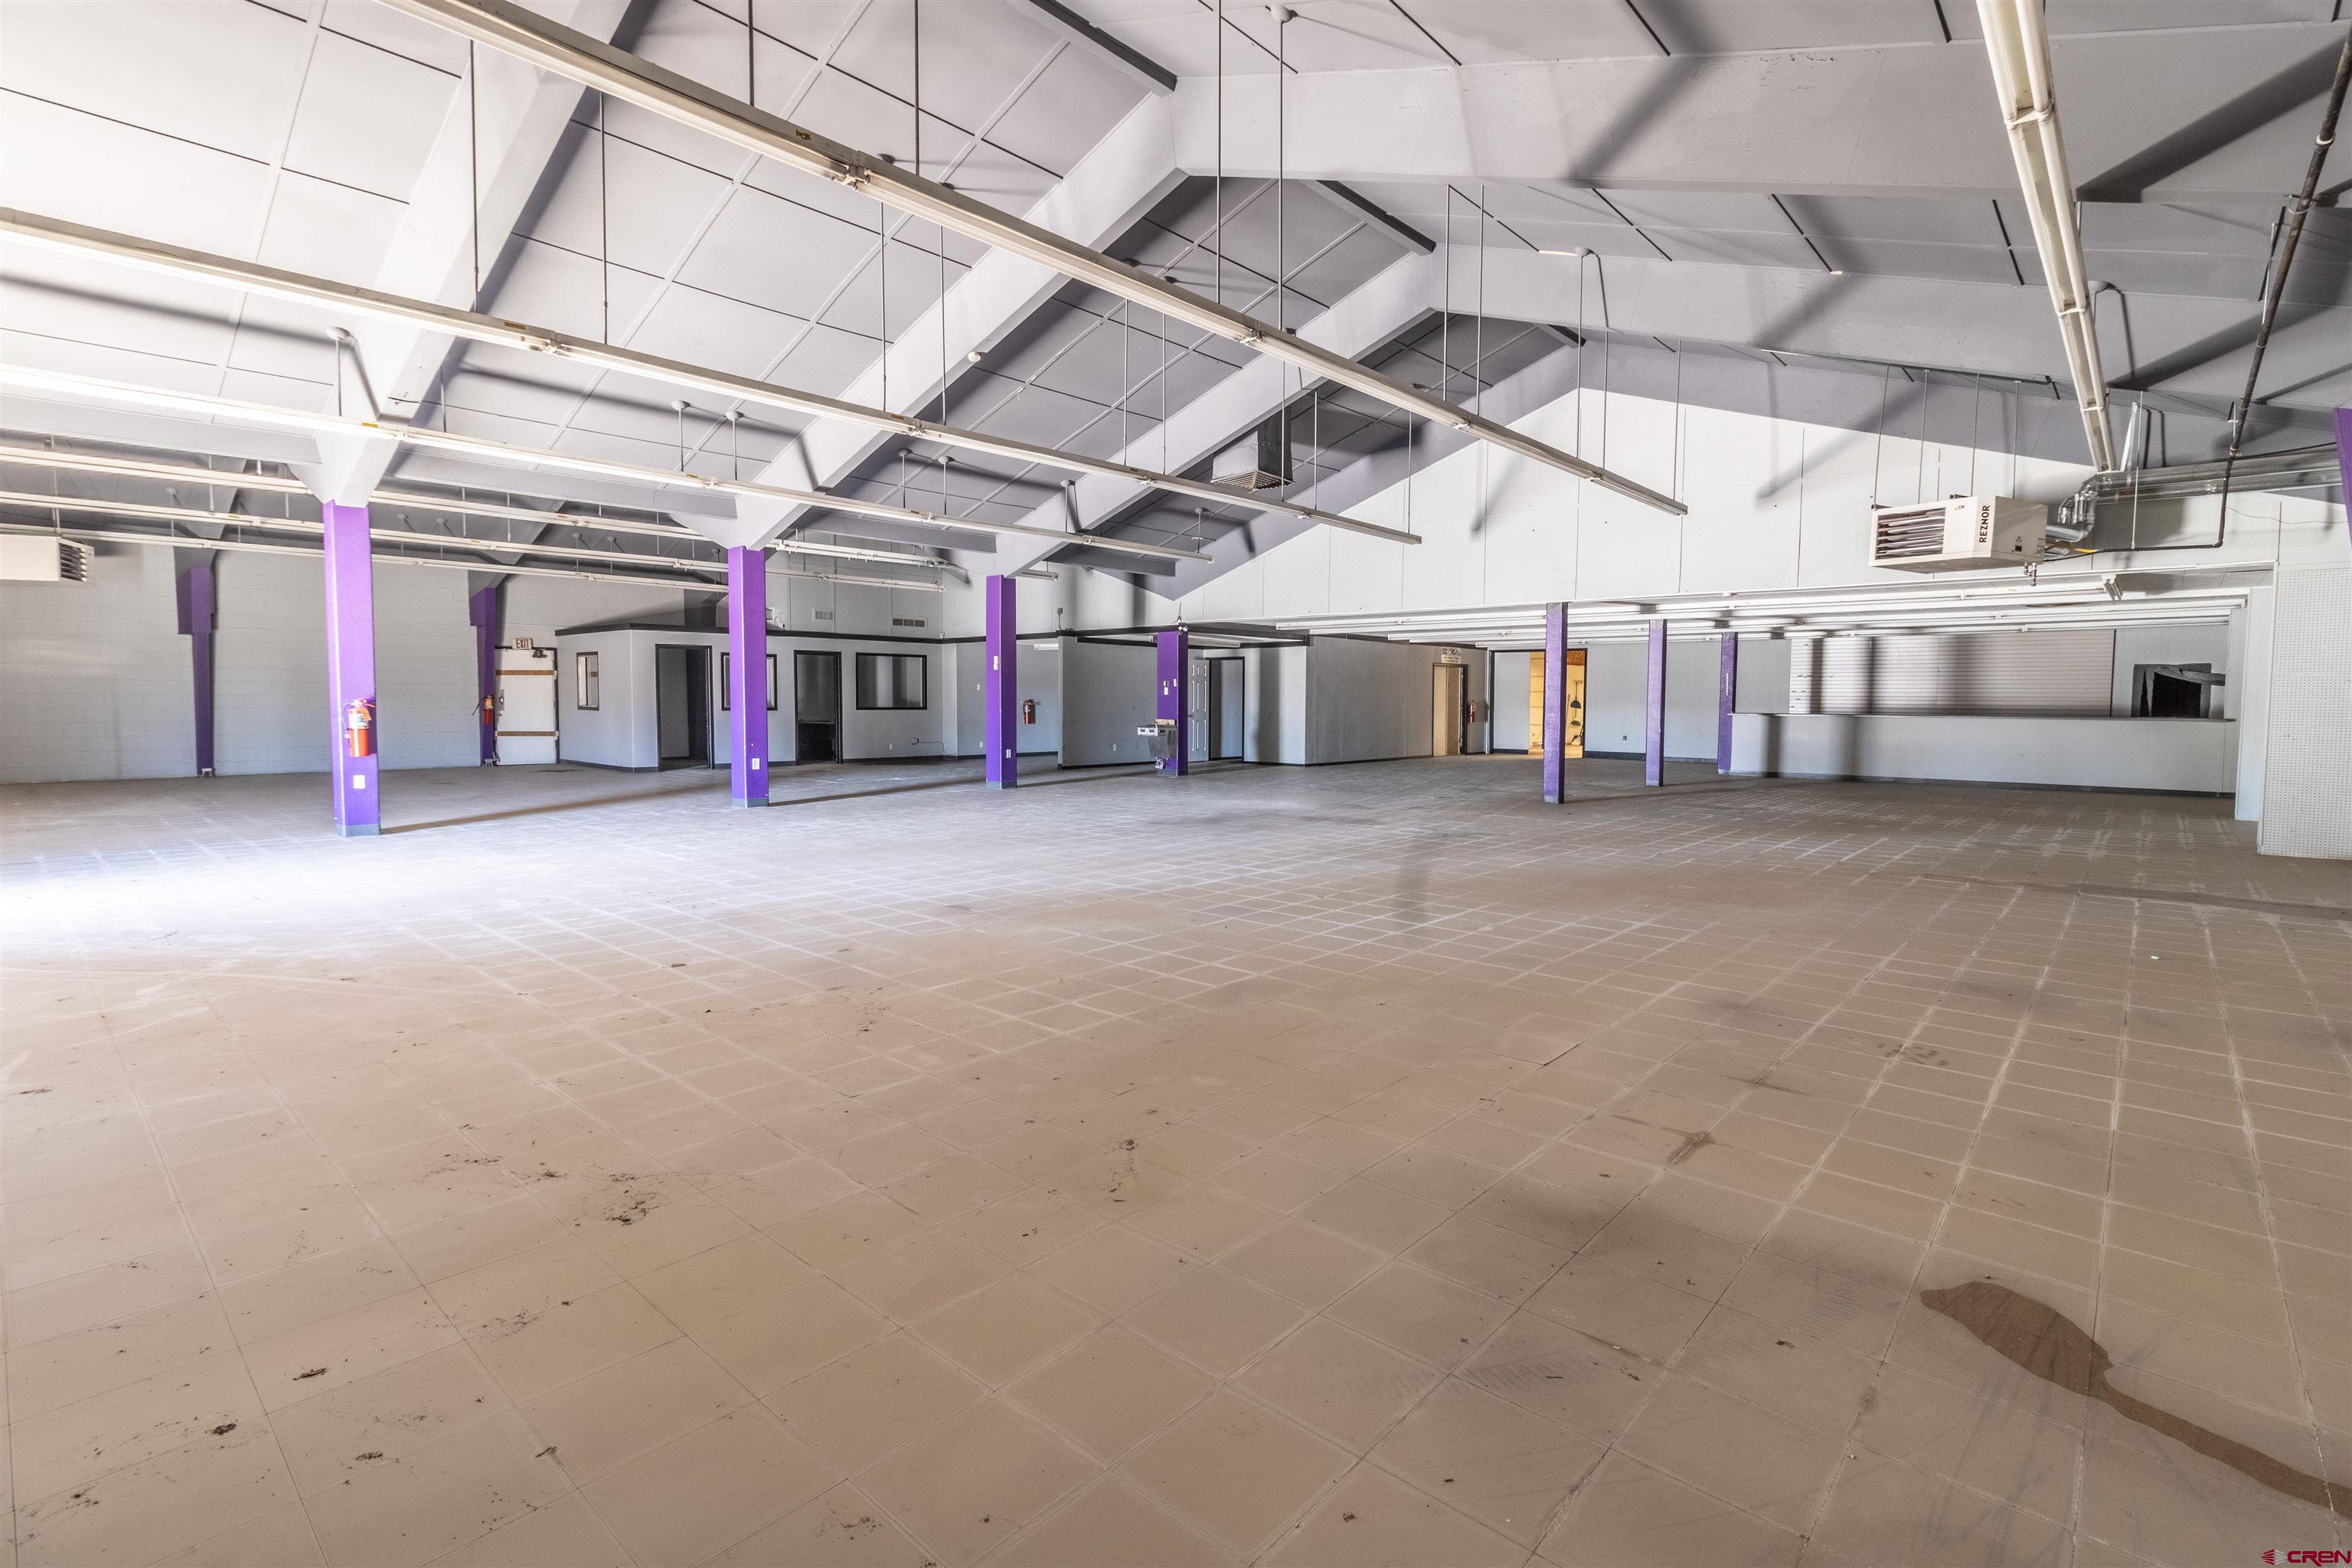 a view of a big room with an empty space